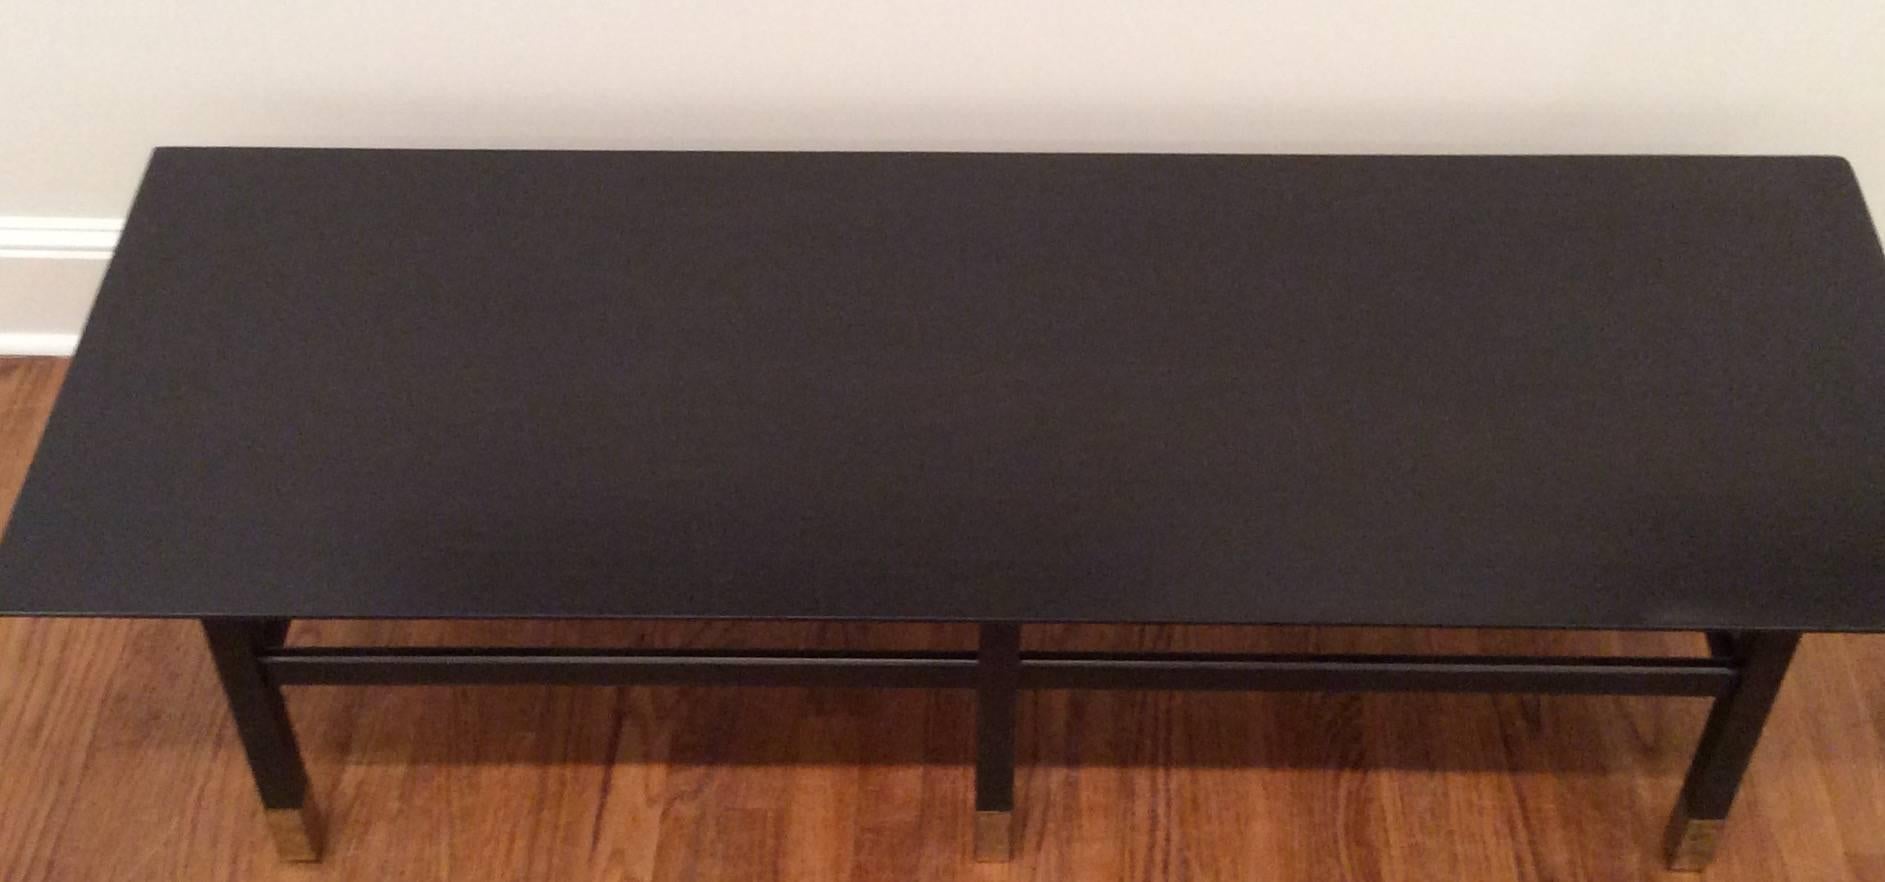 Mid-20th Century Ebonized Wood Coffee Table For Sale